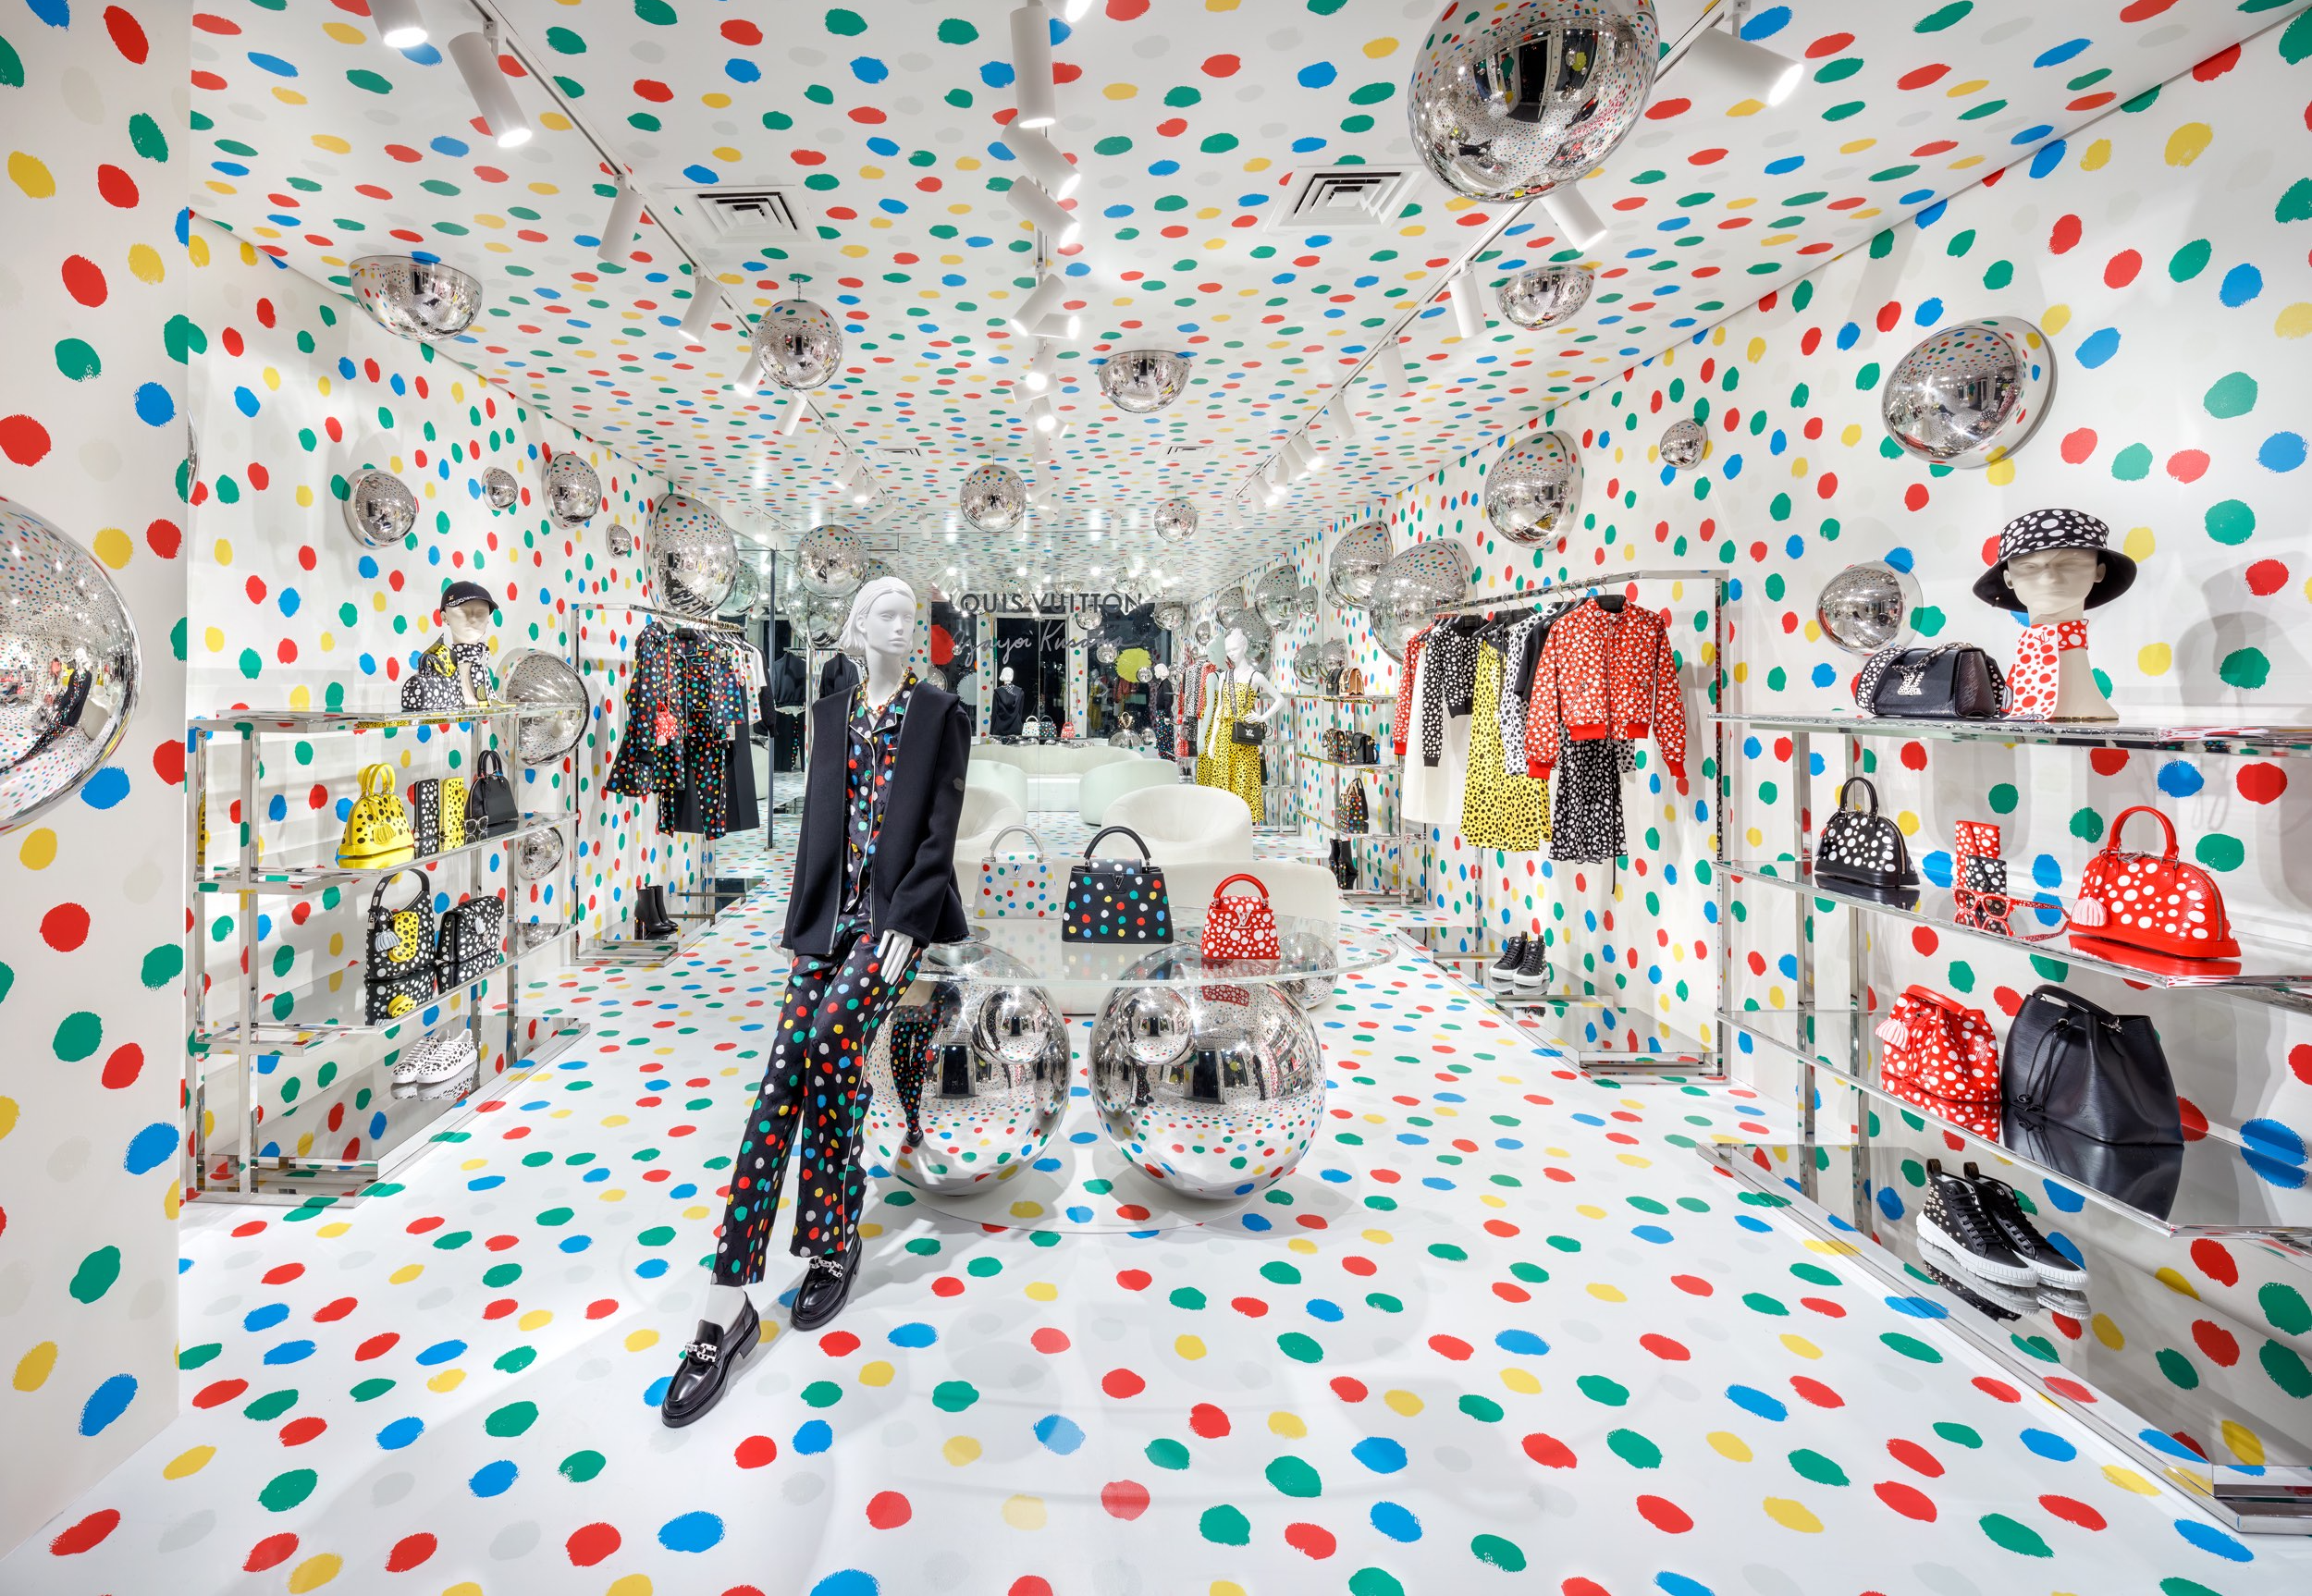 Louis Vuitton Partners With Yayoi Kusama To Launch 10,000 NFTs - CoinCu News